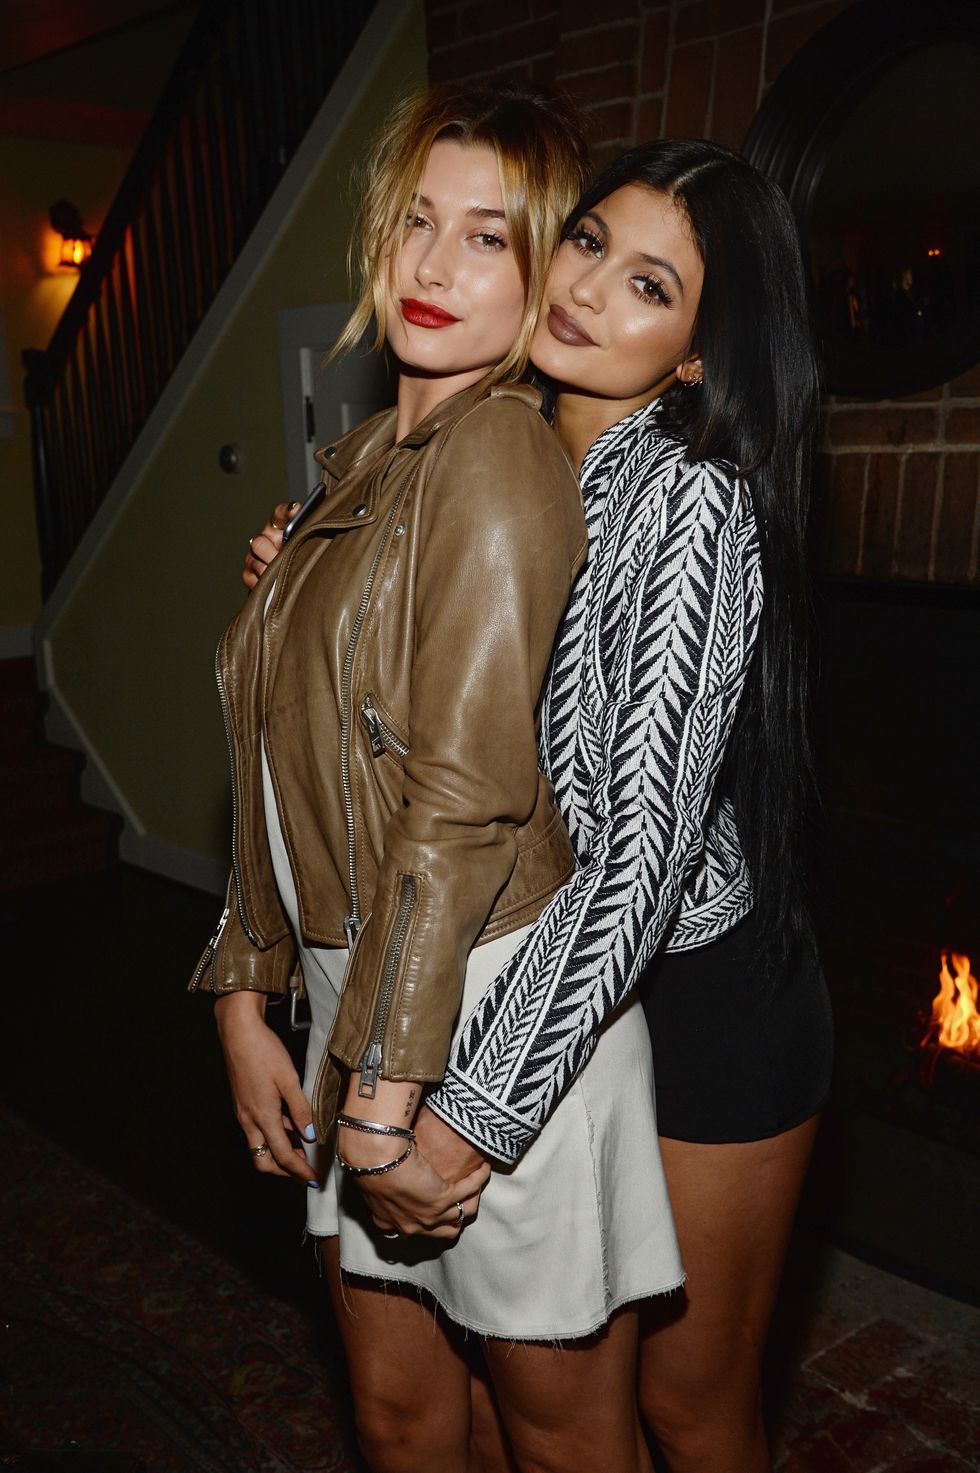 Gigi Hadid and Kylie Jenner at Kendall Jenner's #mycalvins launch party